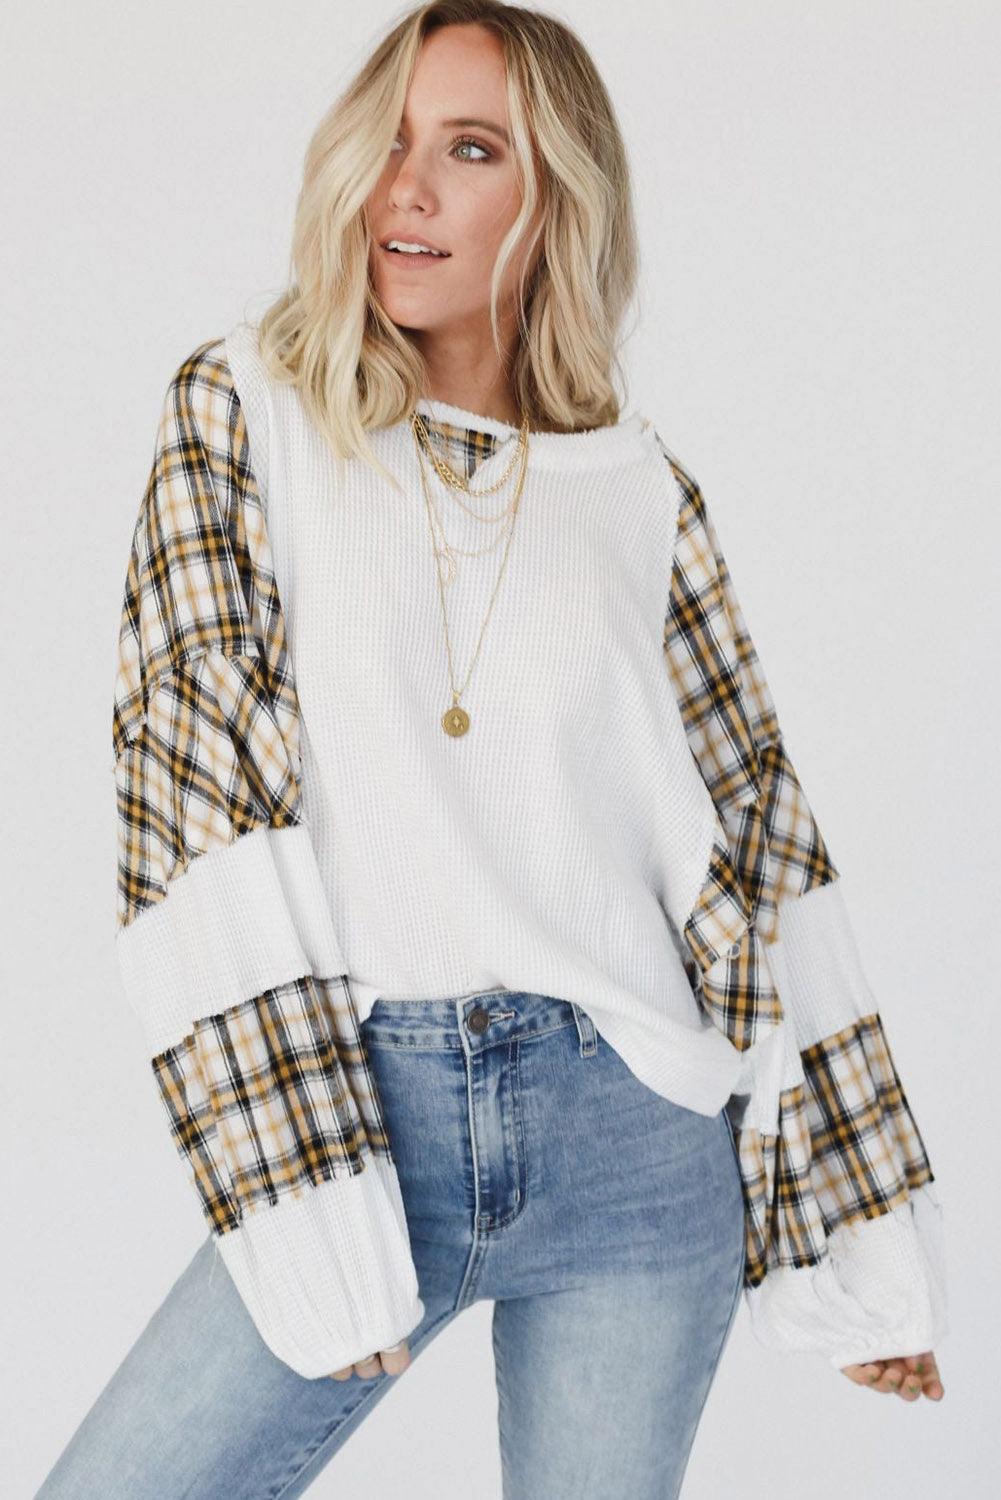 Plaid Sleeve Top - Olive Ave